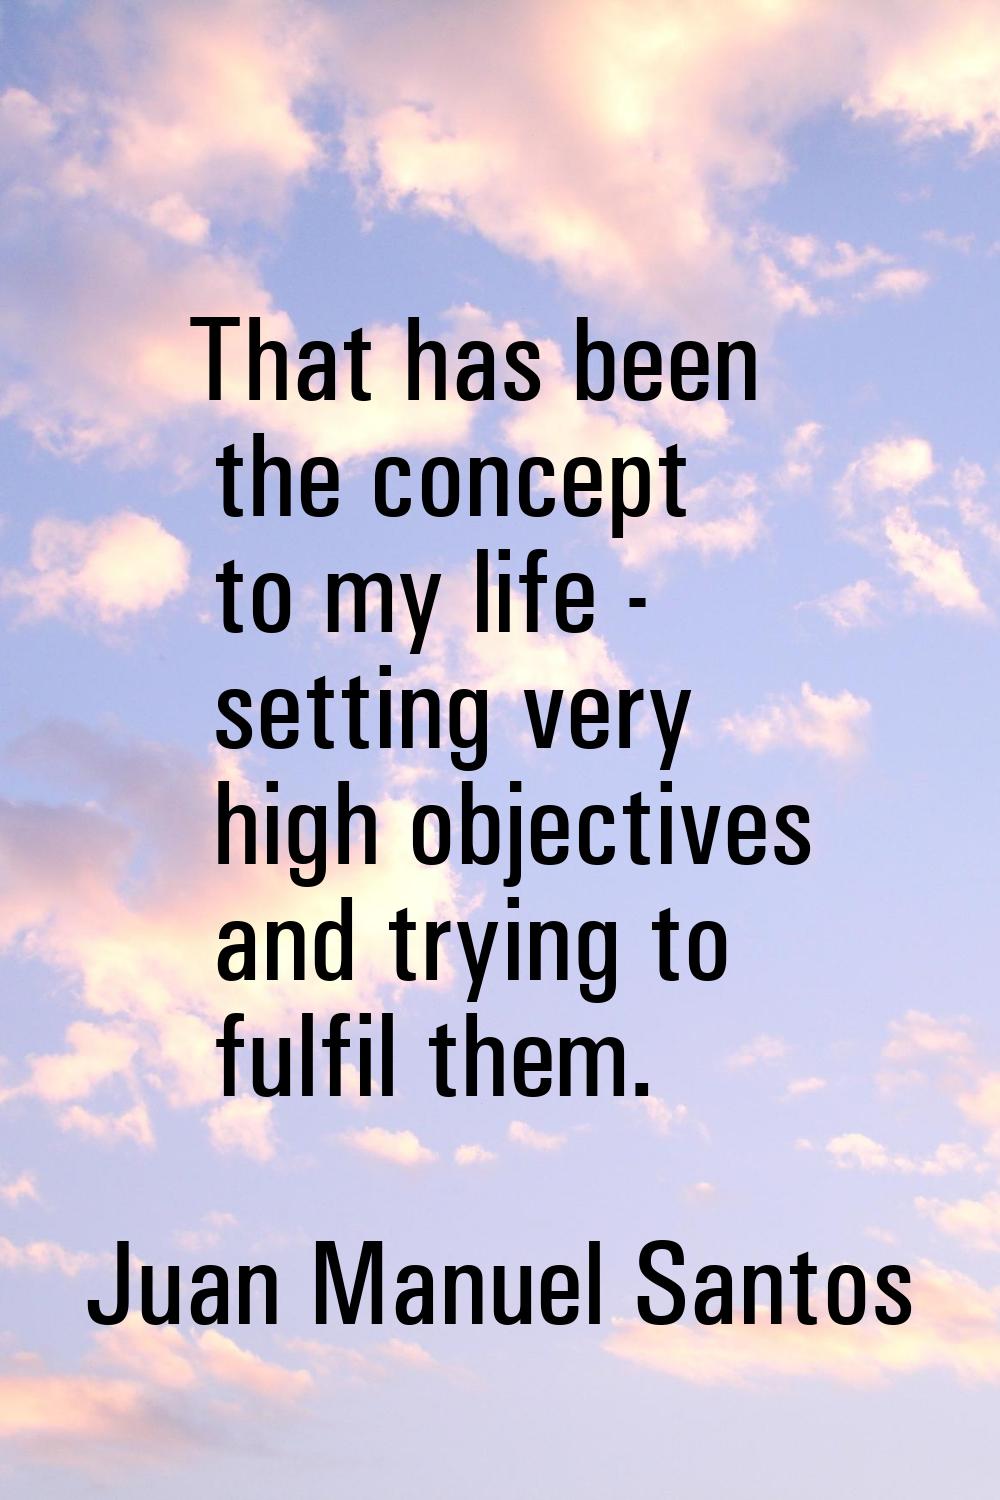 That has been the concept to my life - setting very high objectives and trying to fulfil them.